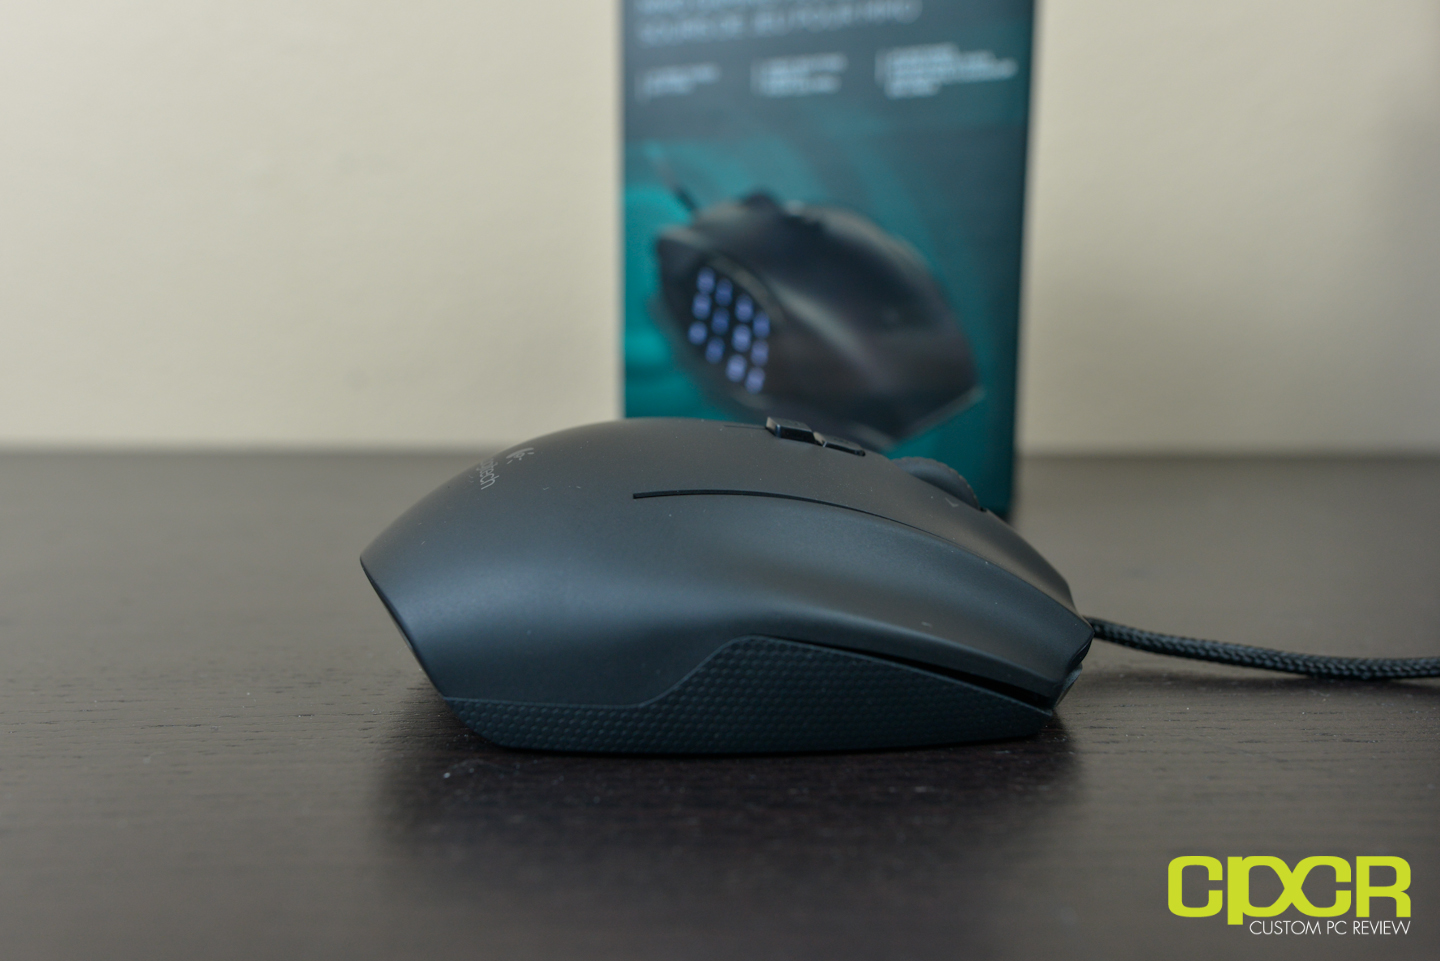 Logitech Pro Gaming Mouse review